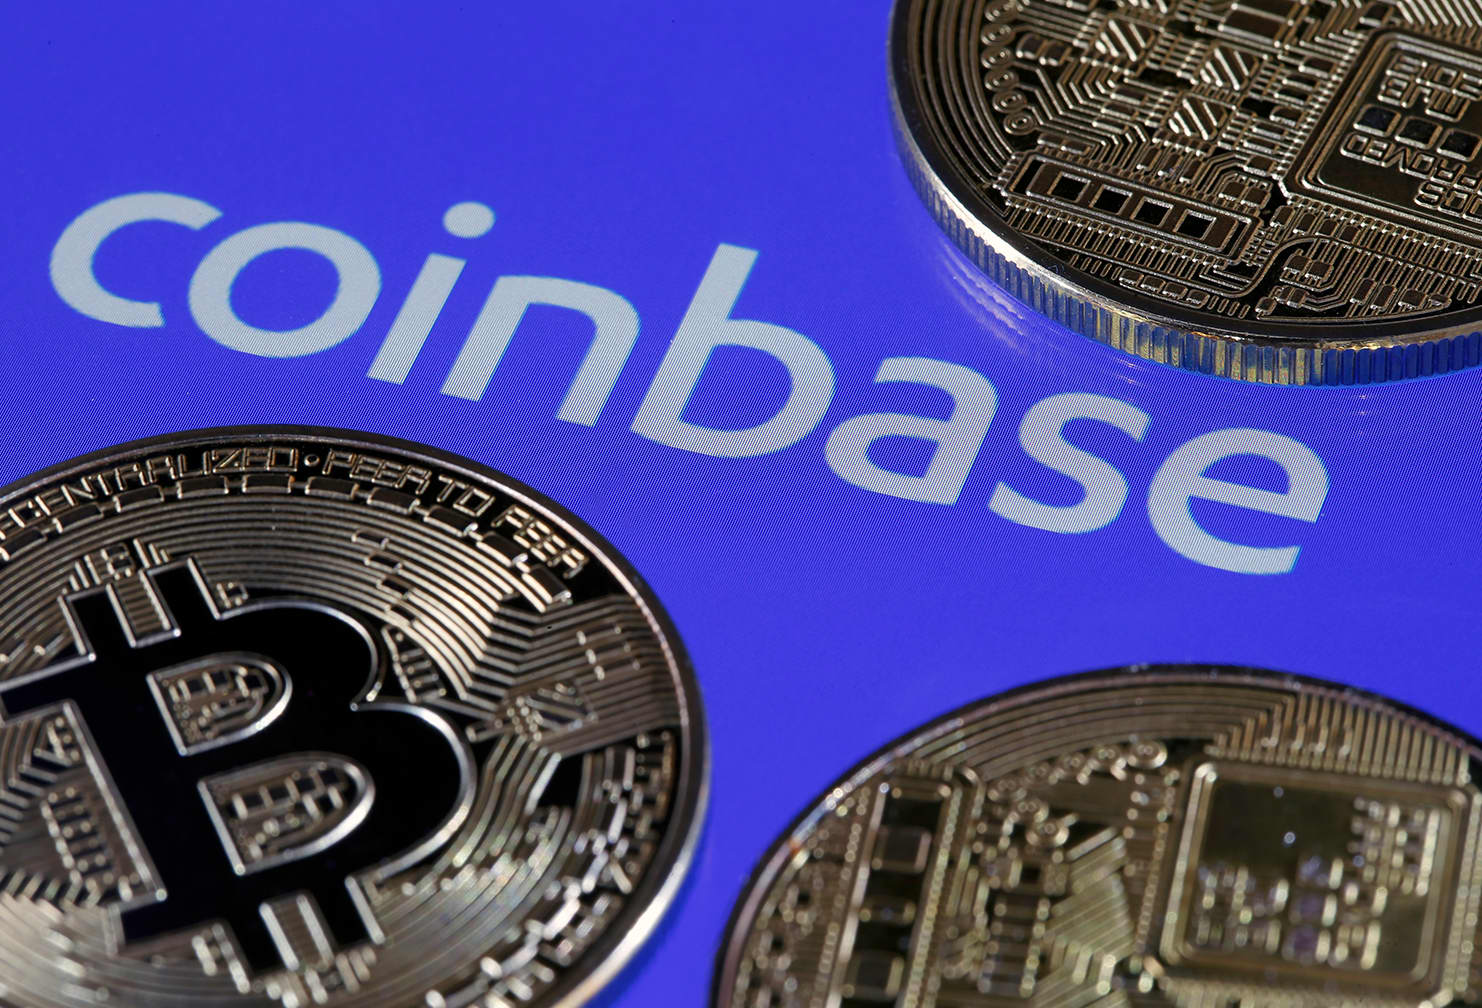 Coinbase could drop more than 45% as protracted SEC battle unfolds, says TD Cowen